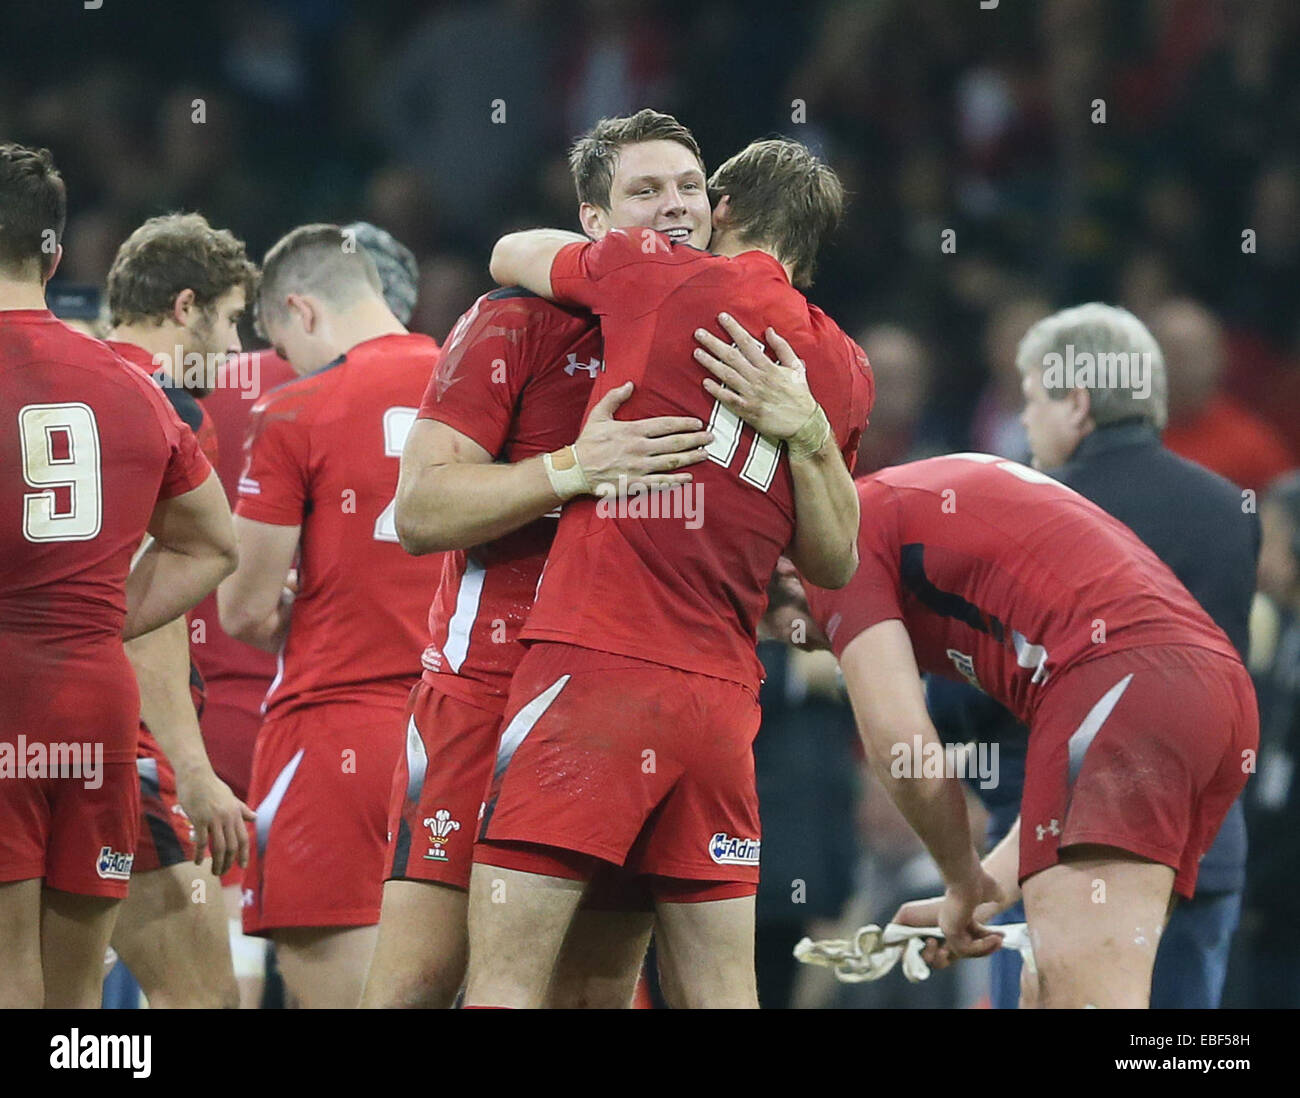 Cardiff, UK. 29th Nov, 2014. Man of the match Dan Biggar of Wales celebrates with Liam Williams of Wales - Autumn Internationals - Wales vs South Africa - Millennium Stadium - Cardiff - Wales - 29th November 2014 - Picture Simon Bellis/Sportimage. Credit:  csm/Alamy Live News Stock Photo